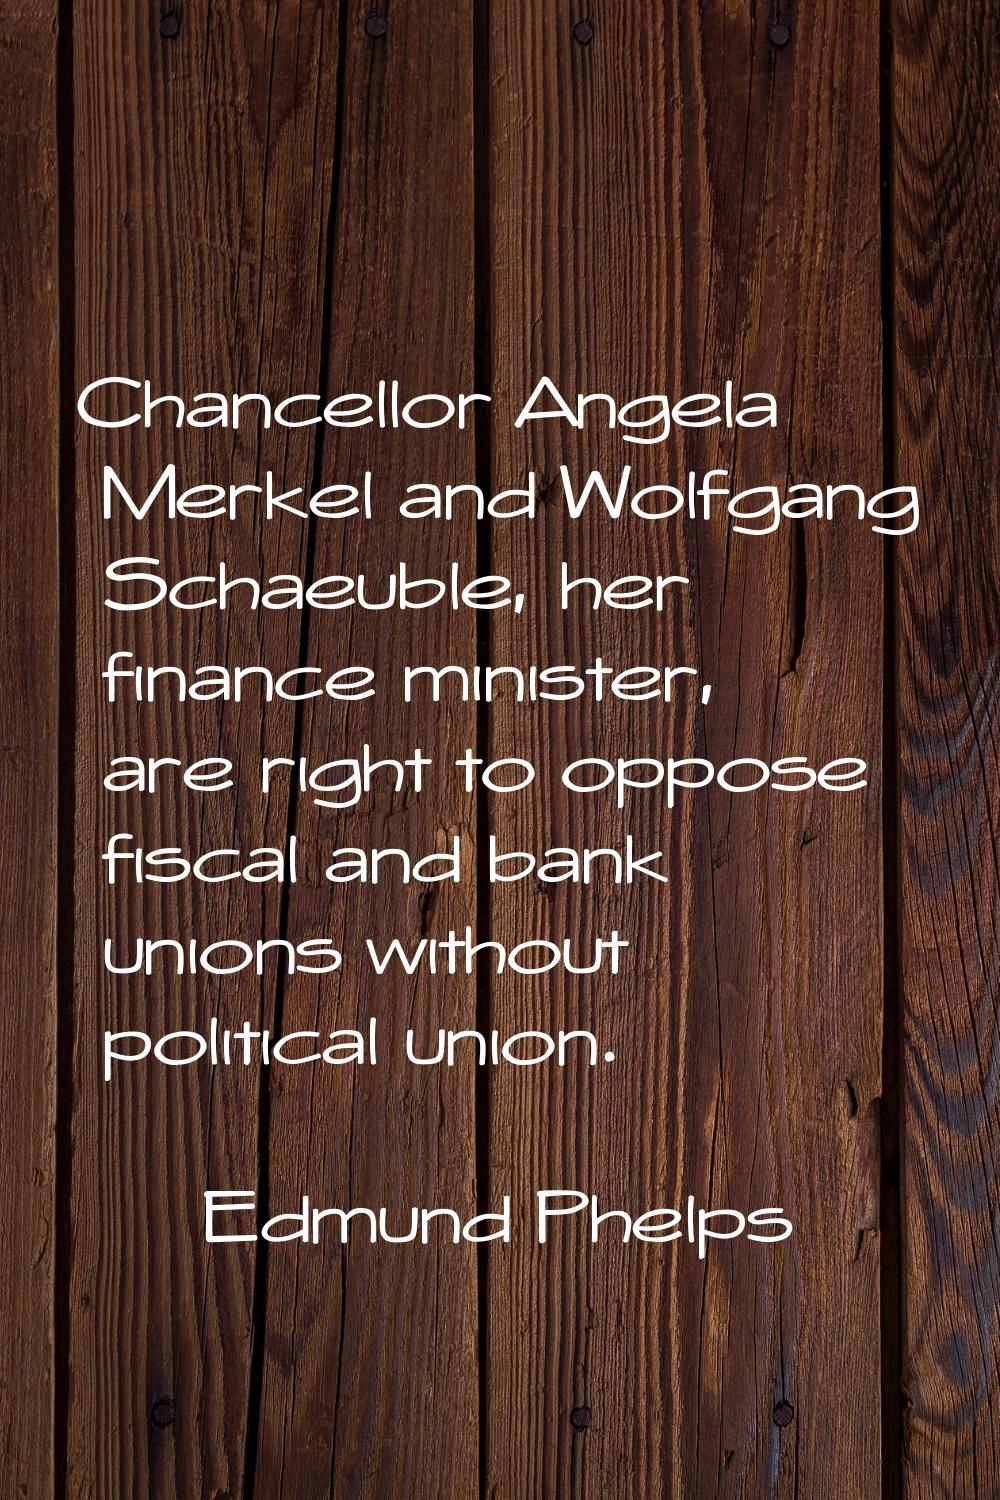 Chancellor Angela Merkel and Wolfgang Schaeuble, her finance minister, are right to oppose fiscal a